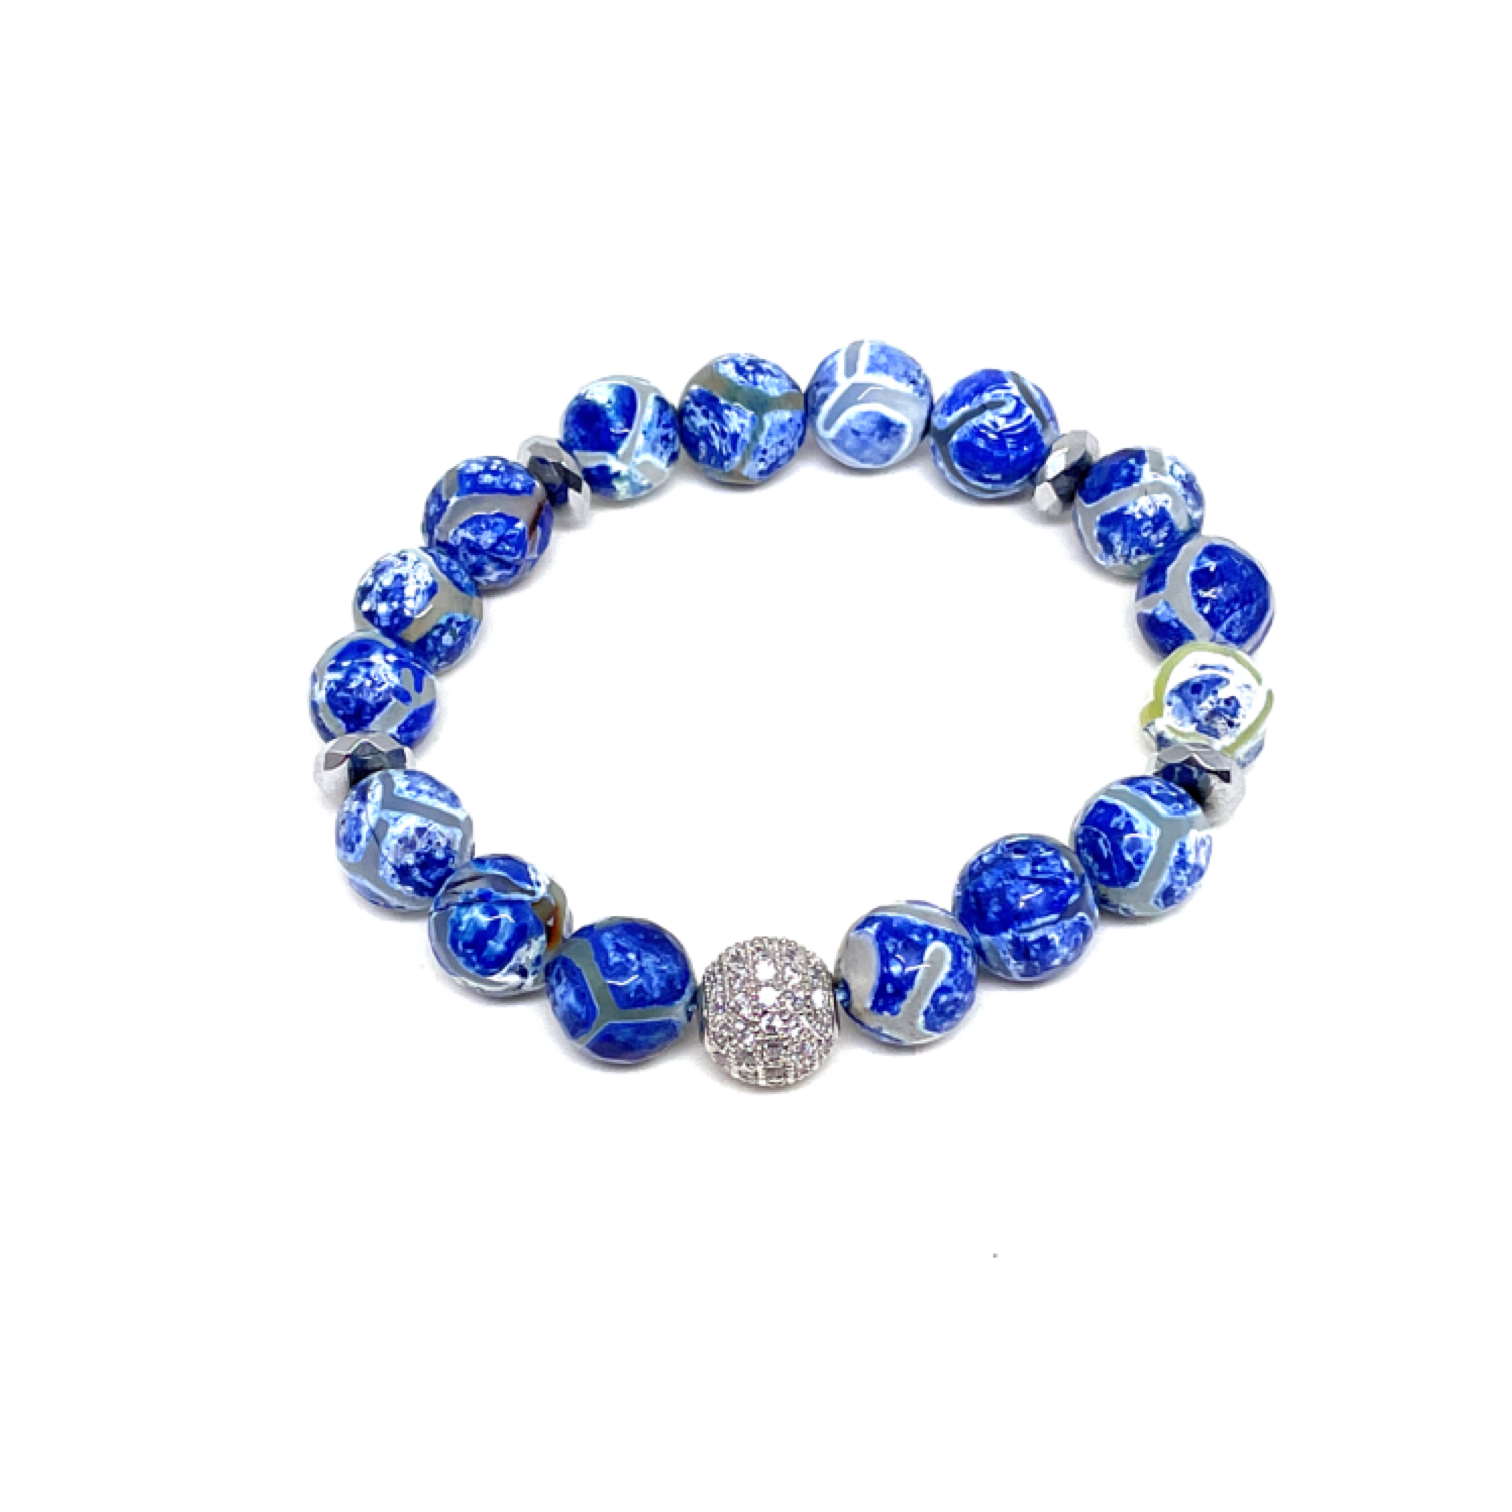 Blue Tibetian Agate with Pave Bead